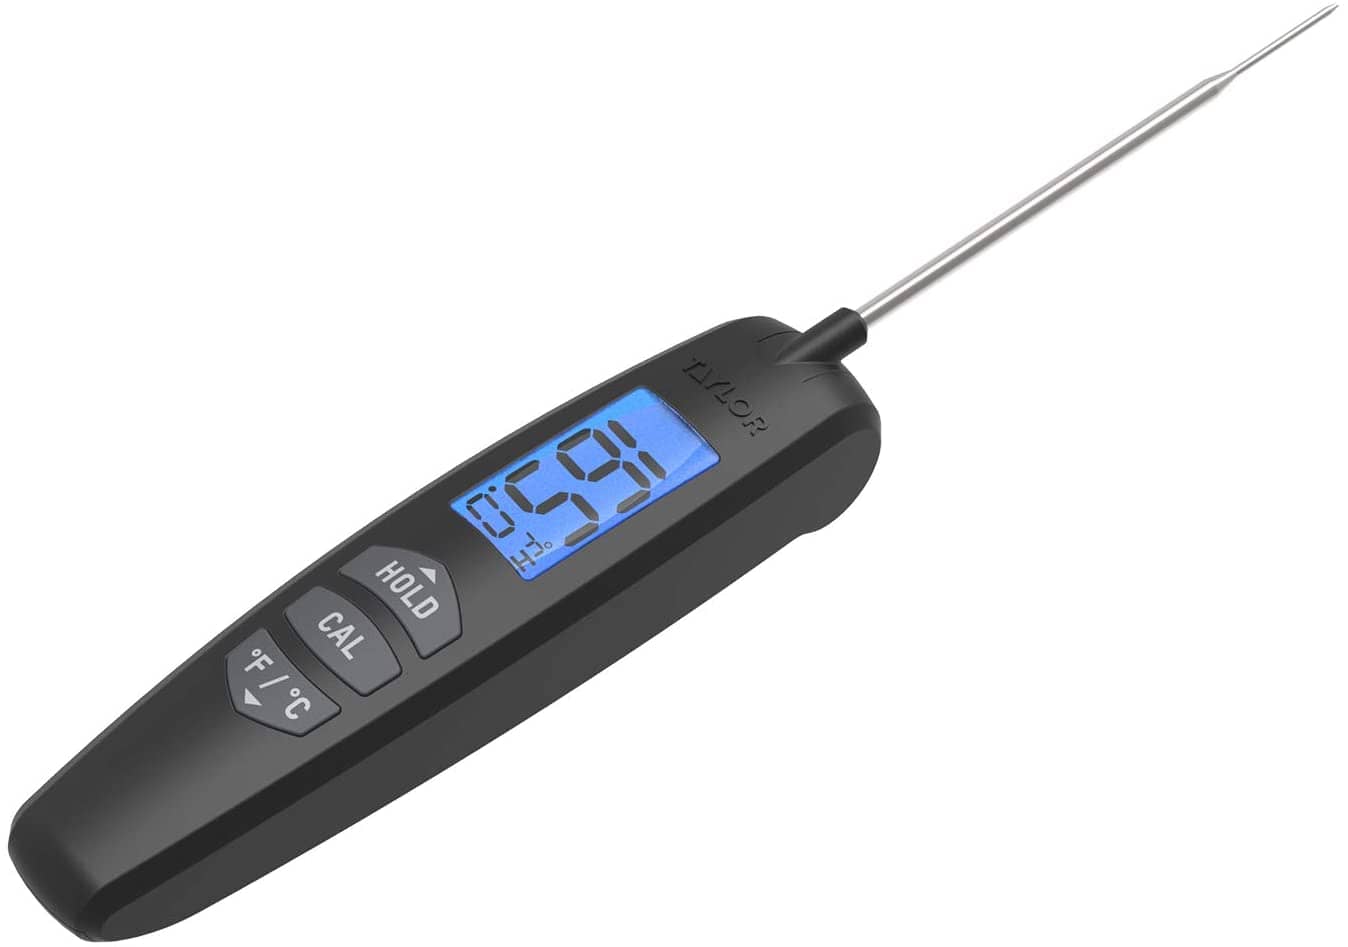 https://cdn.shopify.com/s/files/1/0473/5398/7229/products/taylor-taylor-turbo-read-thermocouple-thermometer-077784986714-19593287893152_1600x.jpg?v=1626103913